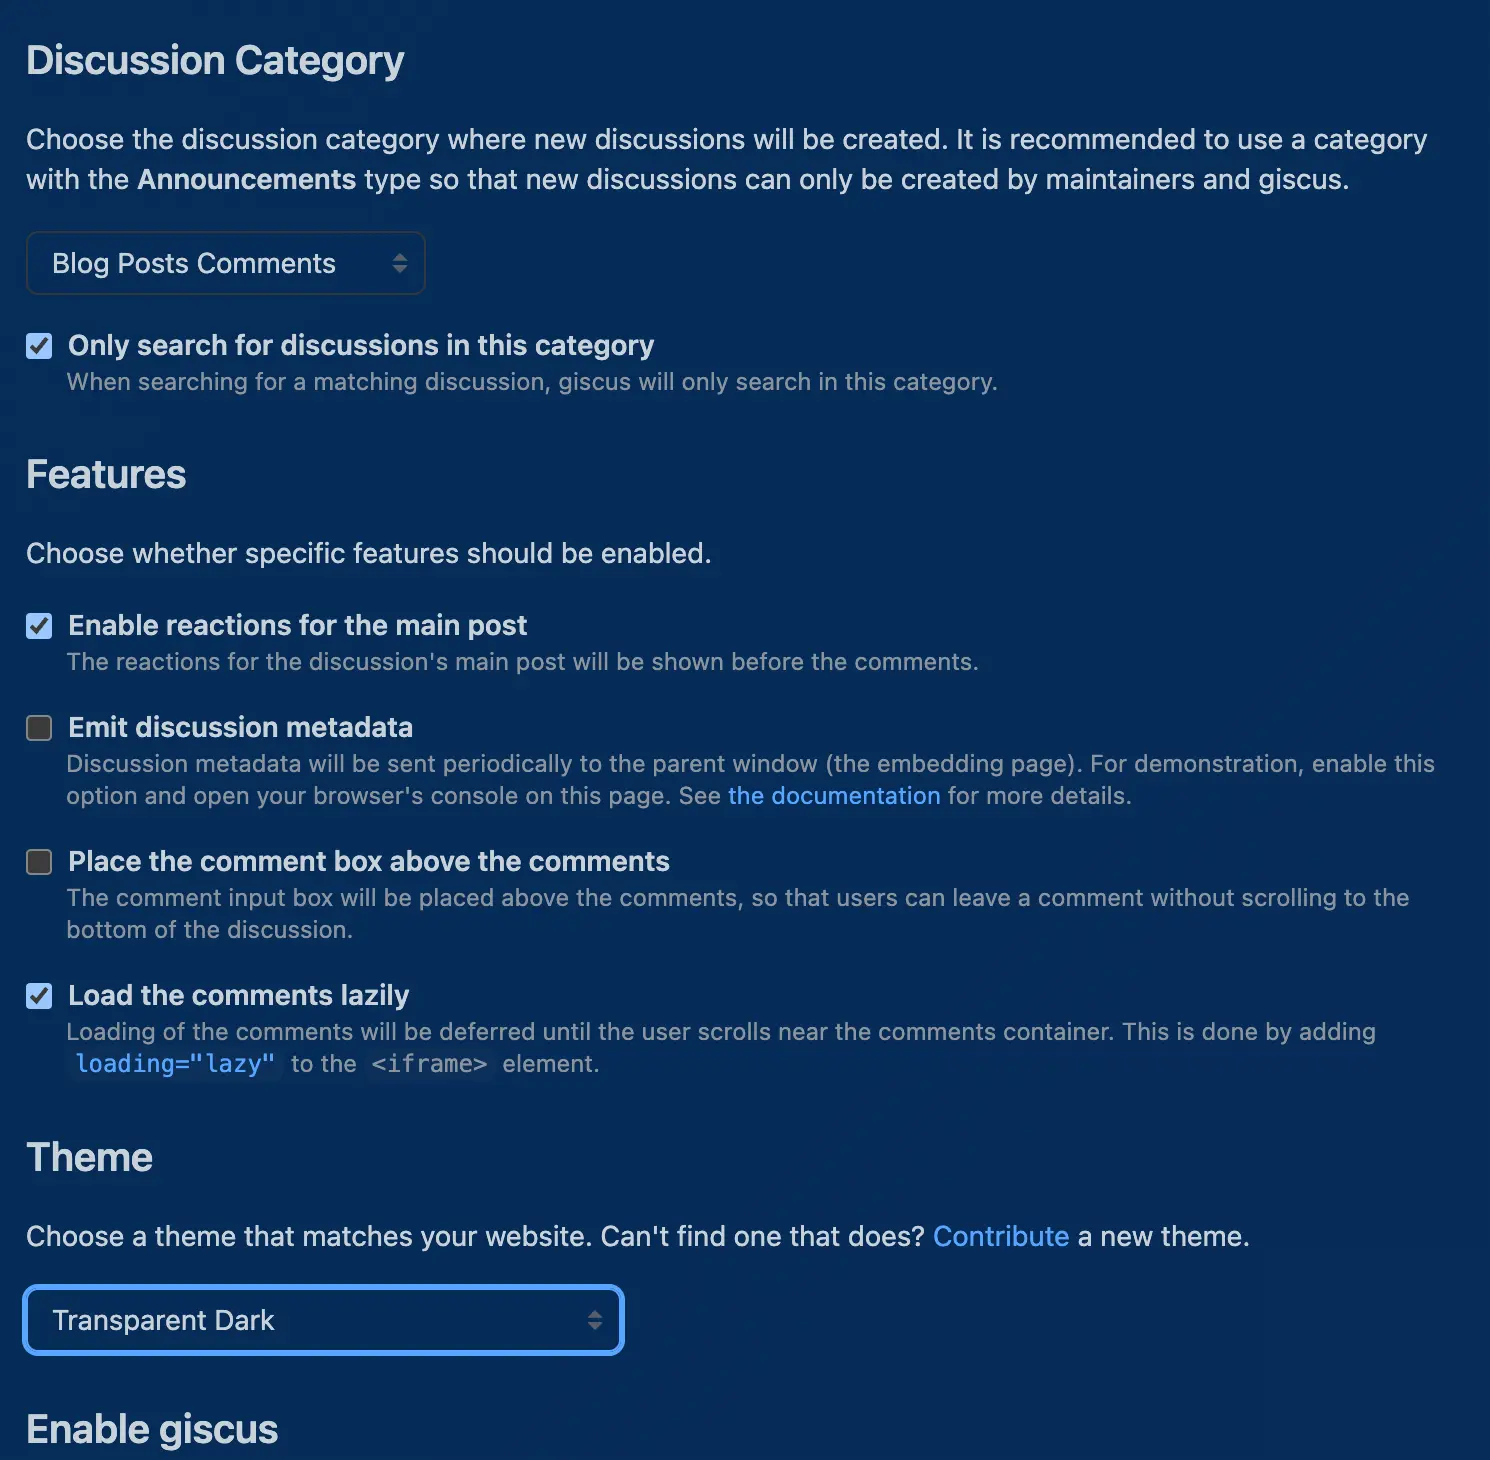 Configure the discussion category, the appearance and loading approach